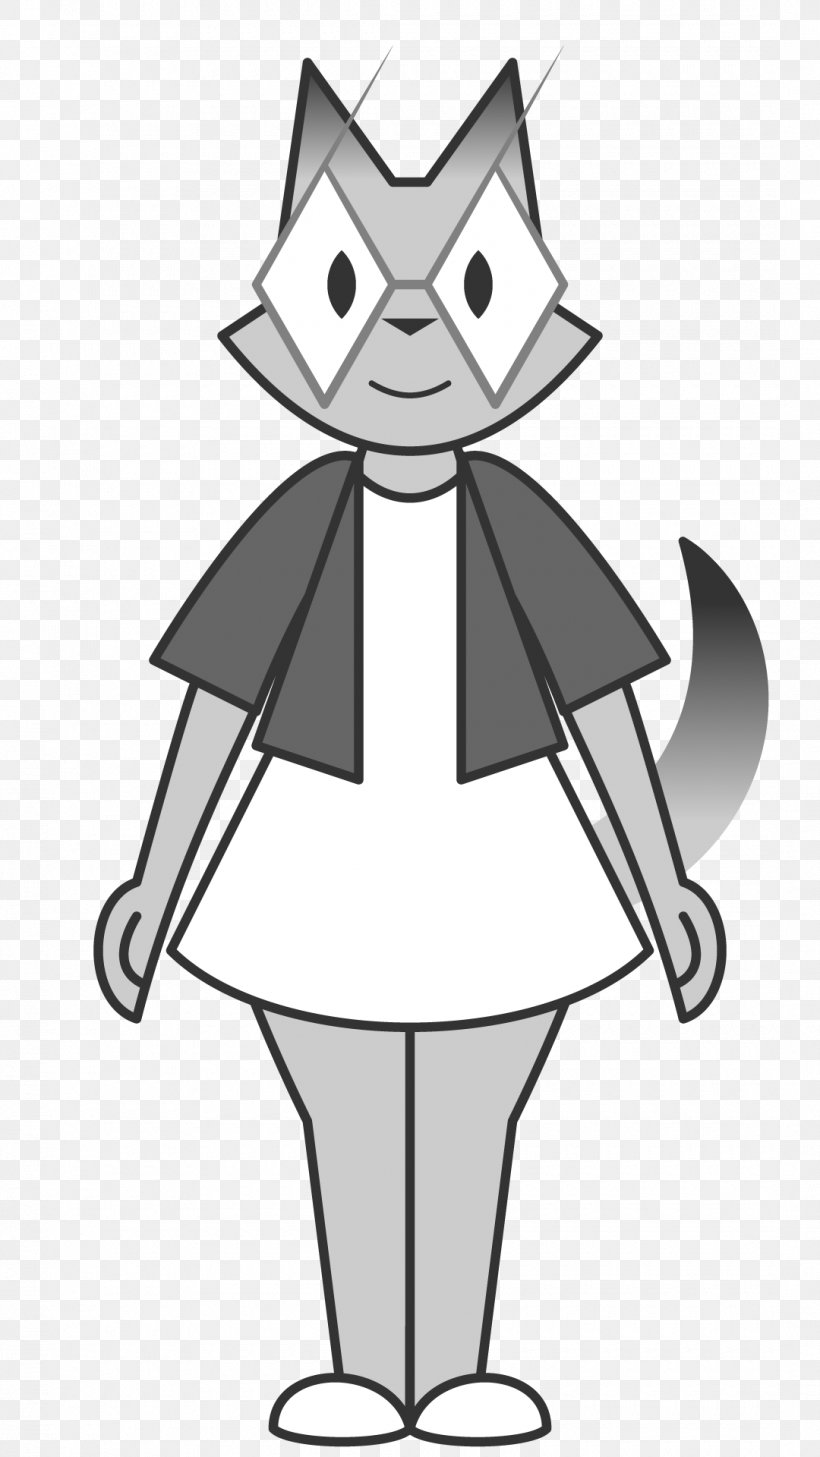 Line Art White Cartoon Character Clip Art, PNG, 1080x1920px, Line Art, Artwork, Black, Black And White, Cartoon Download Free